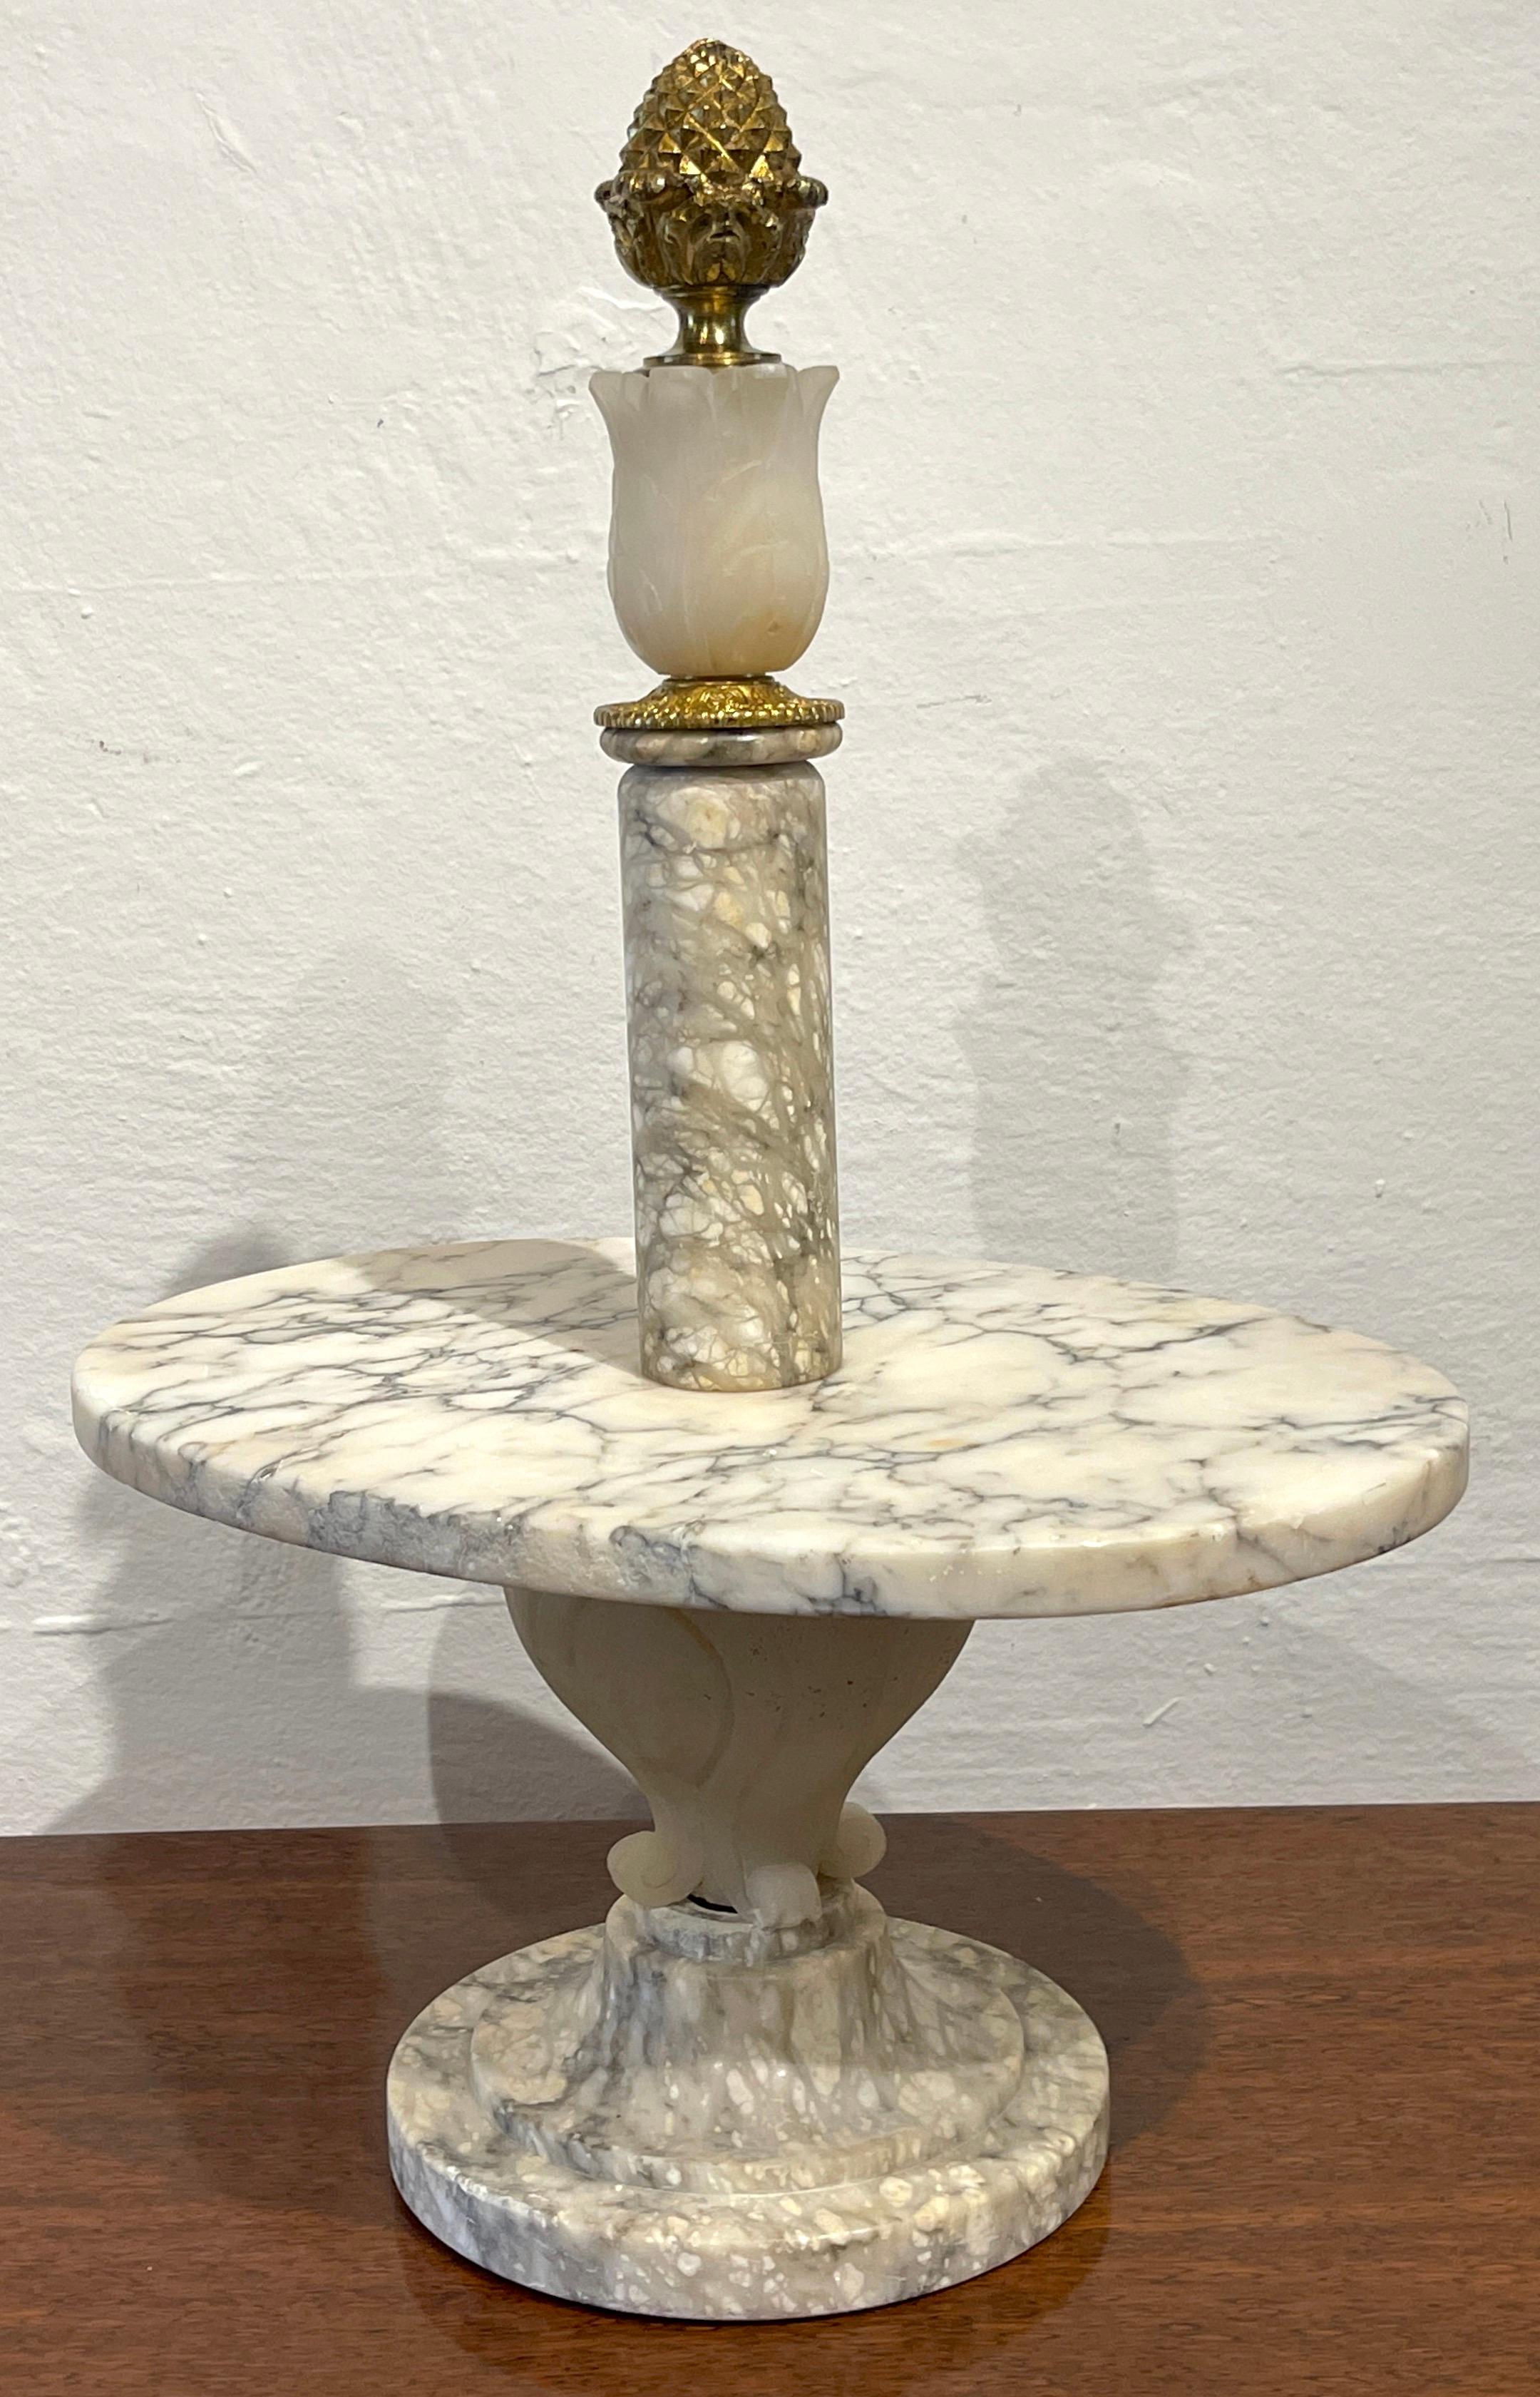 Antique French Neoclassical Marble & Ormolu Pastry Centerpiece / Tazza  For Sale 9